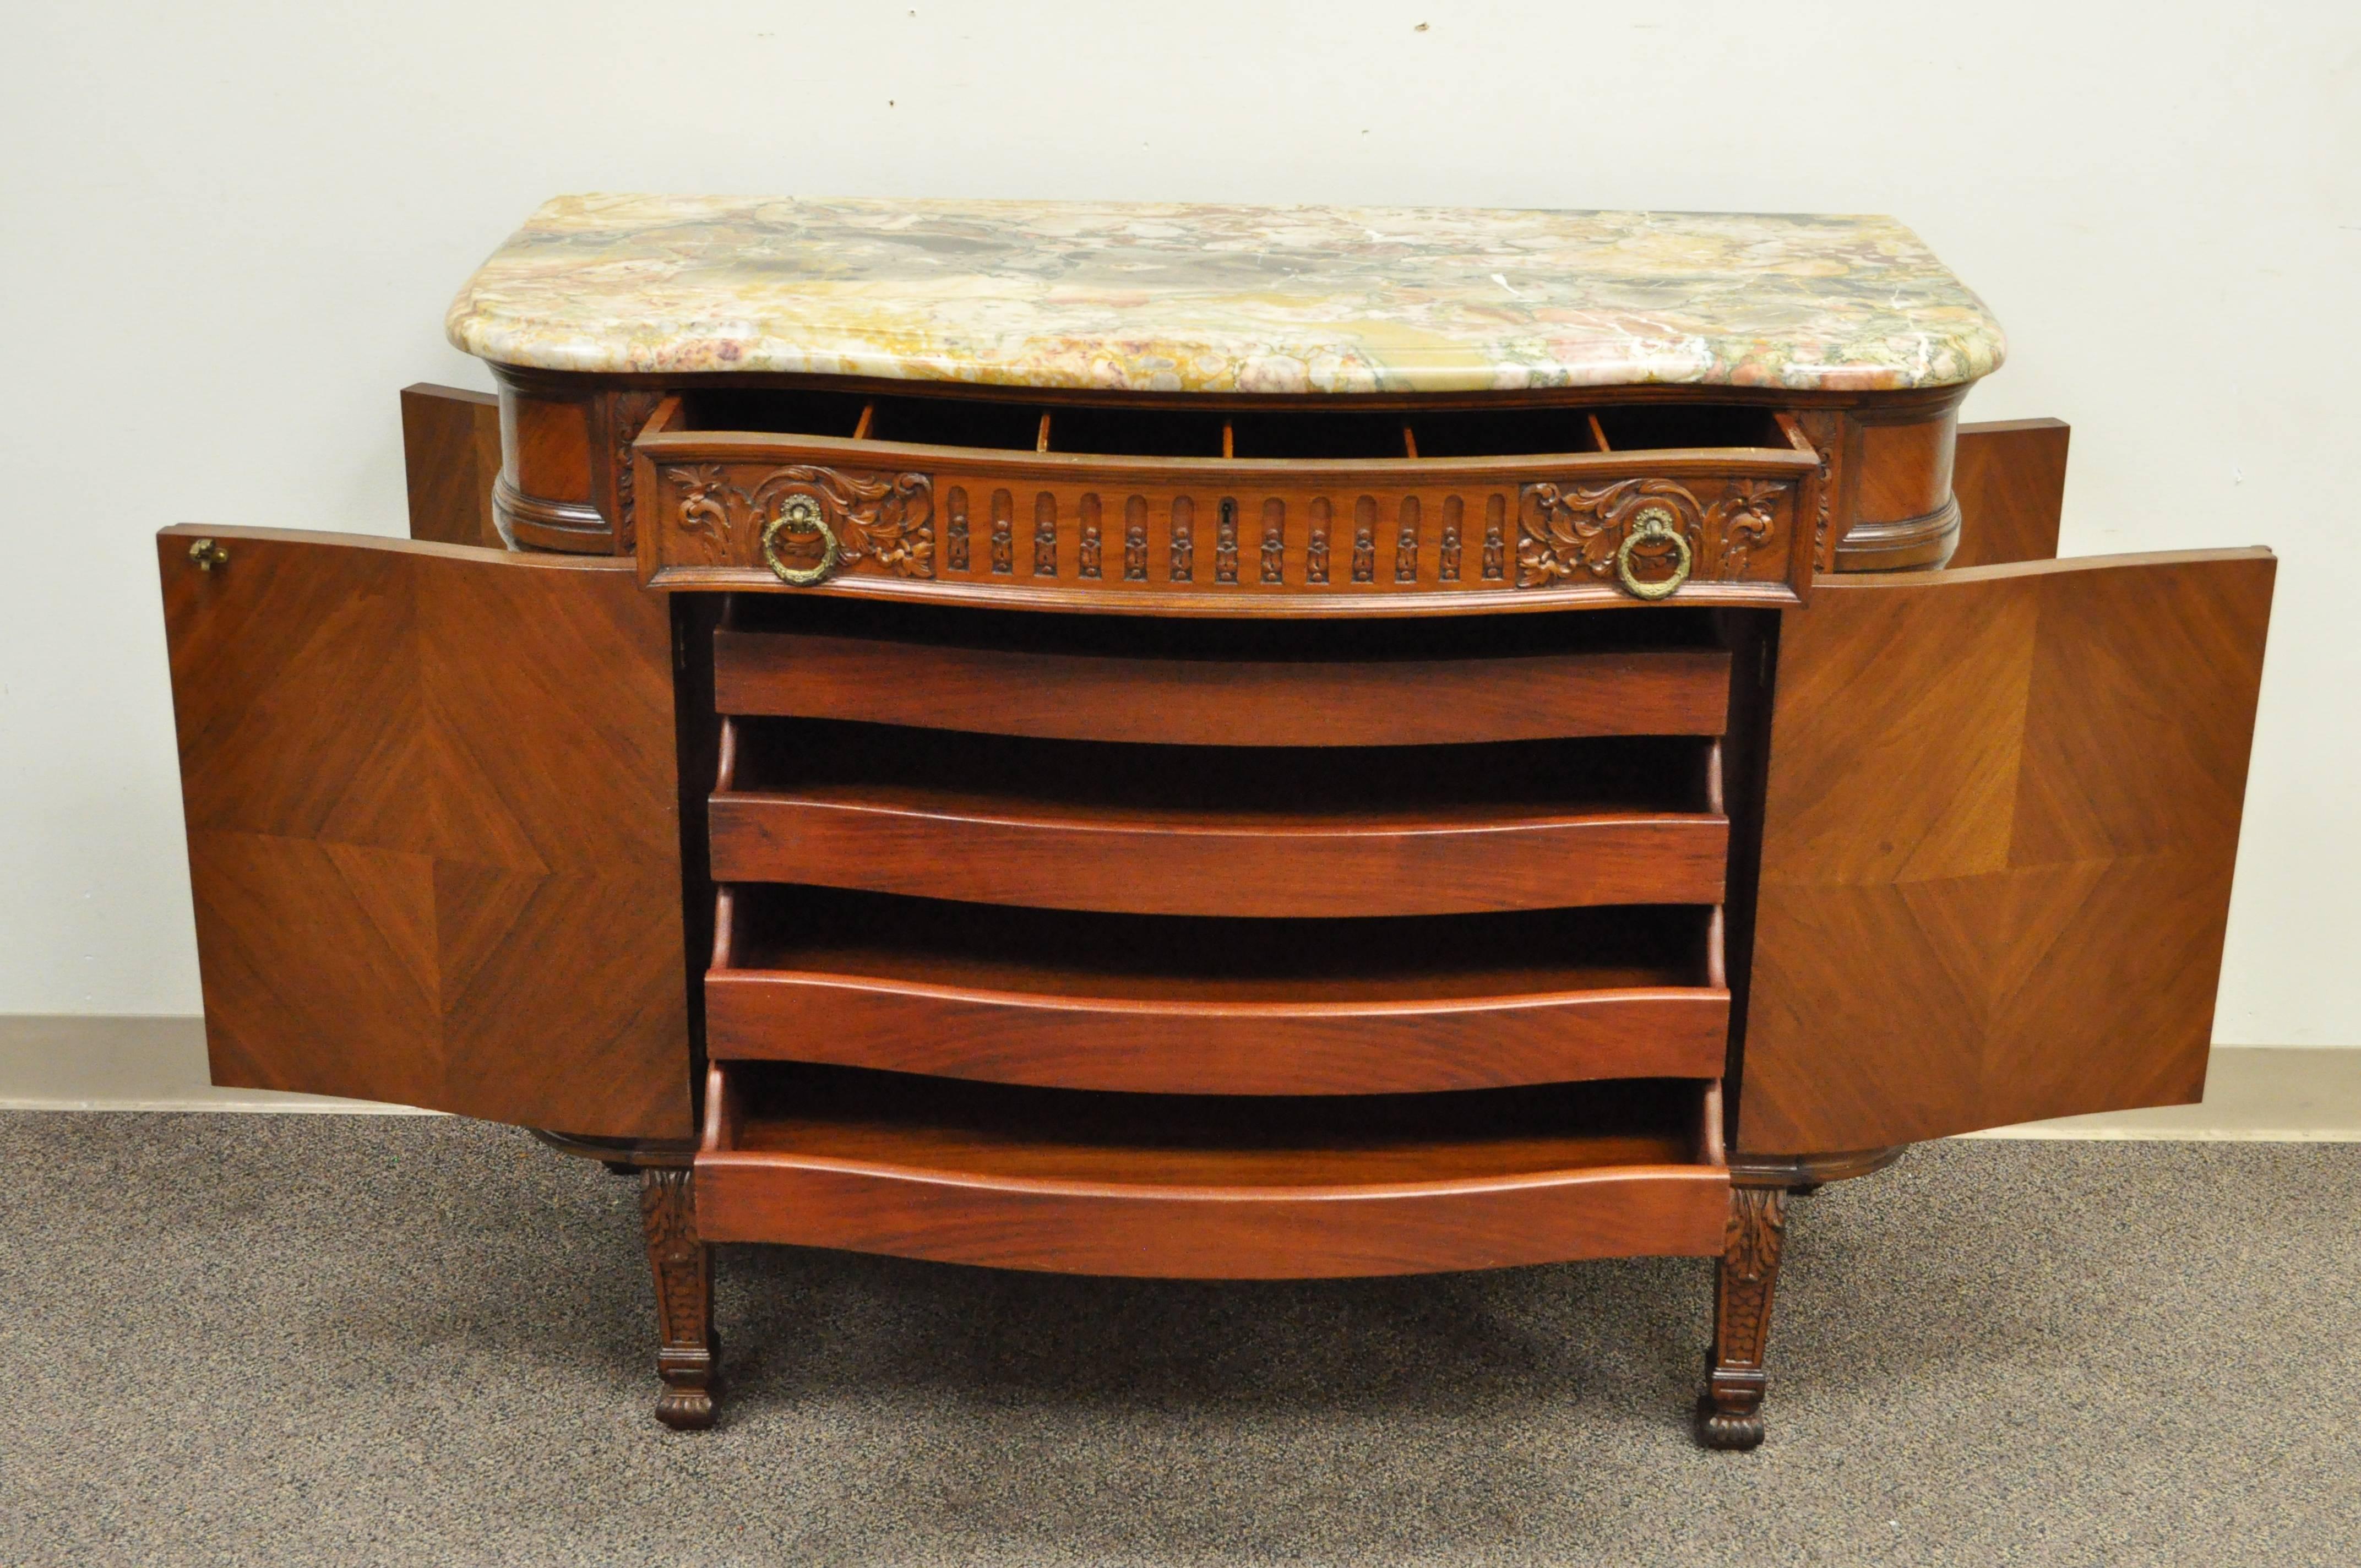 Stunning antique French Renaissance carved walnut and satinwood inlay marble top demilune server, circa first quarter 20th century. This cabinet or buffet features hidden doors on the sides, beautiful carvings and satinwood inlay throughout, shapely